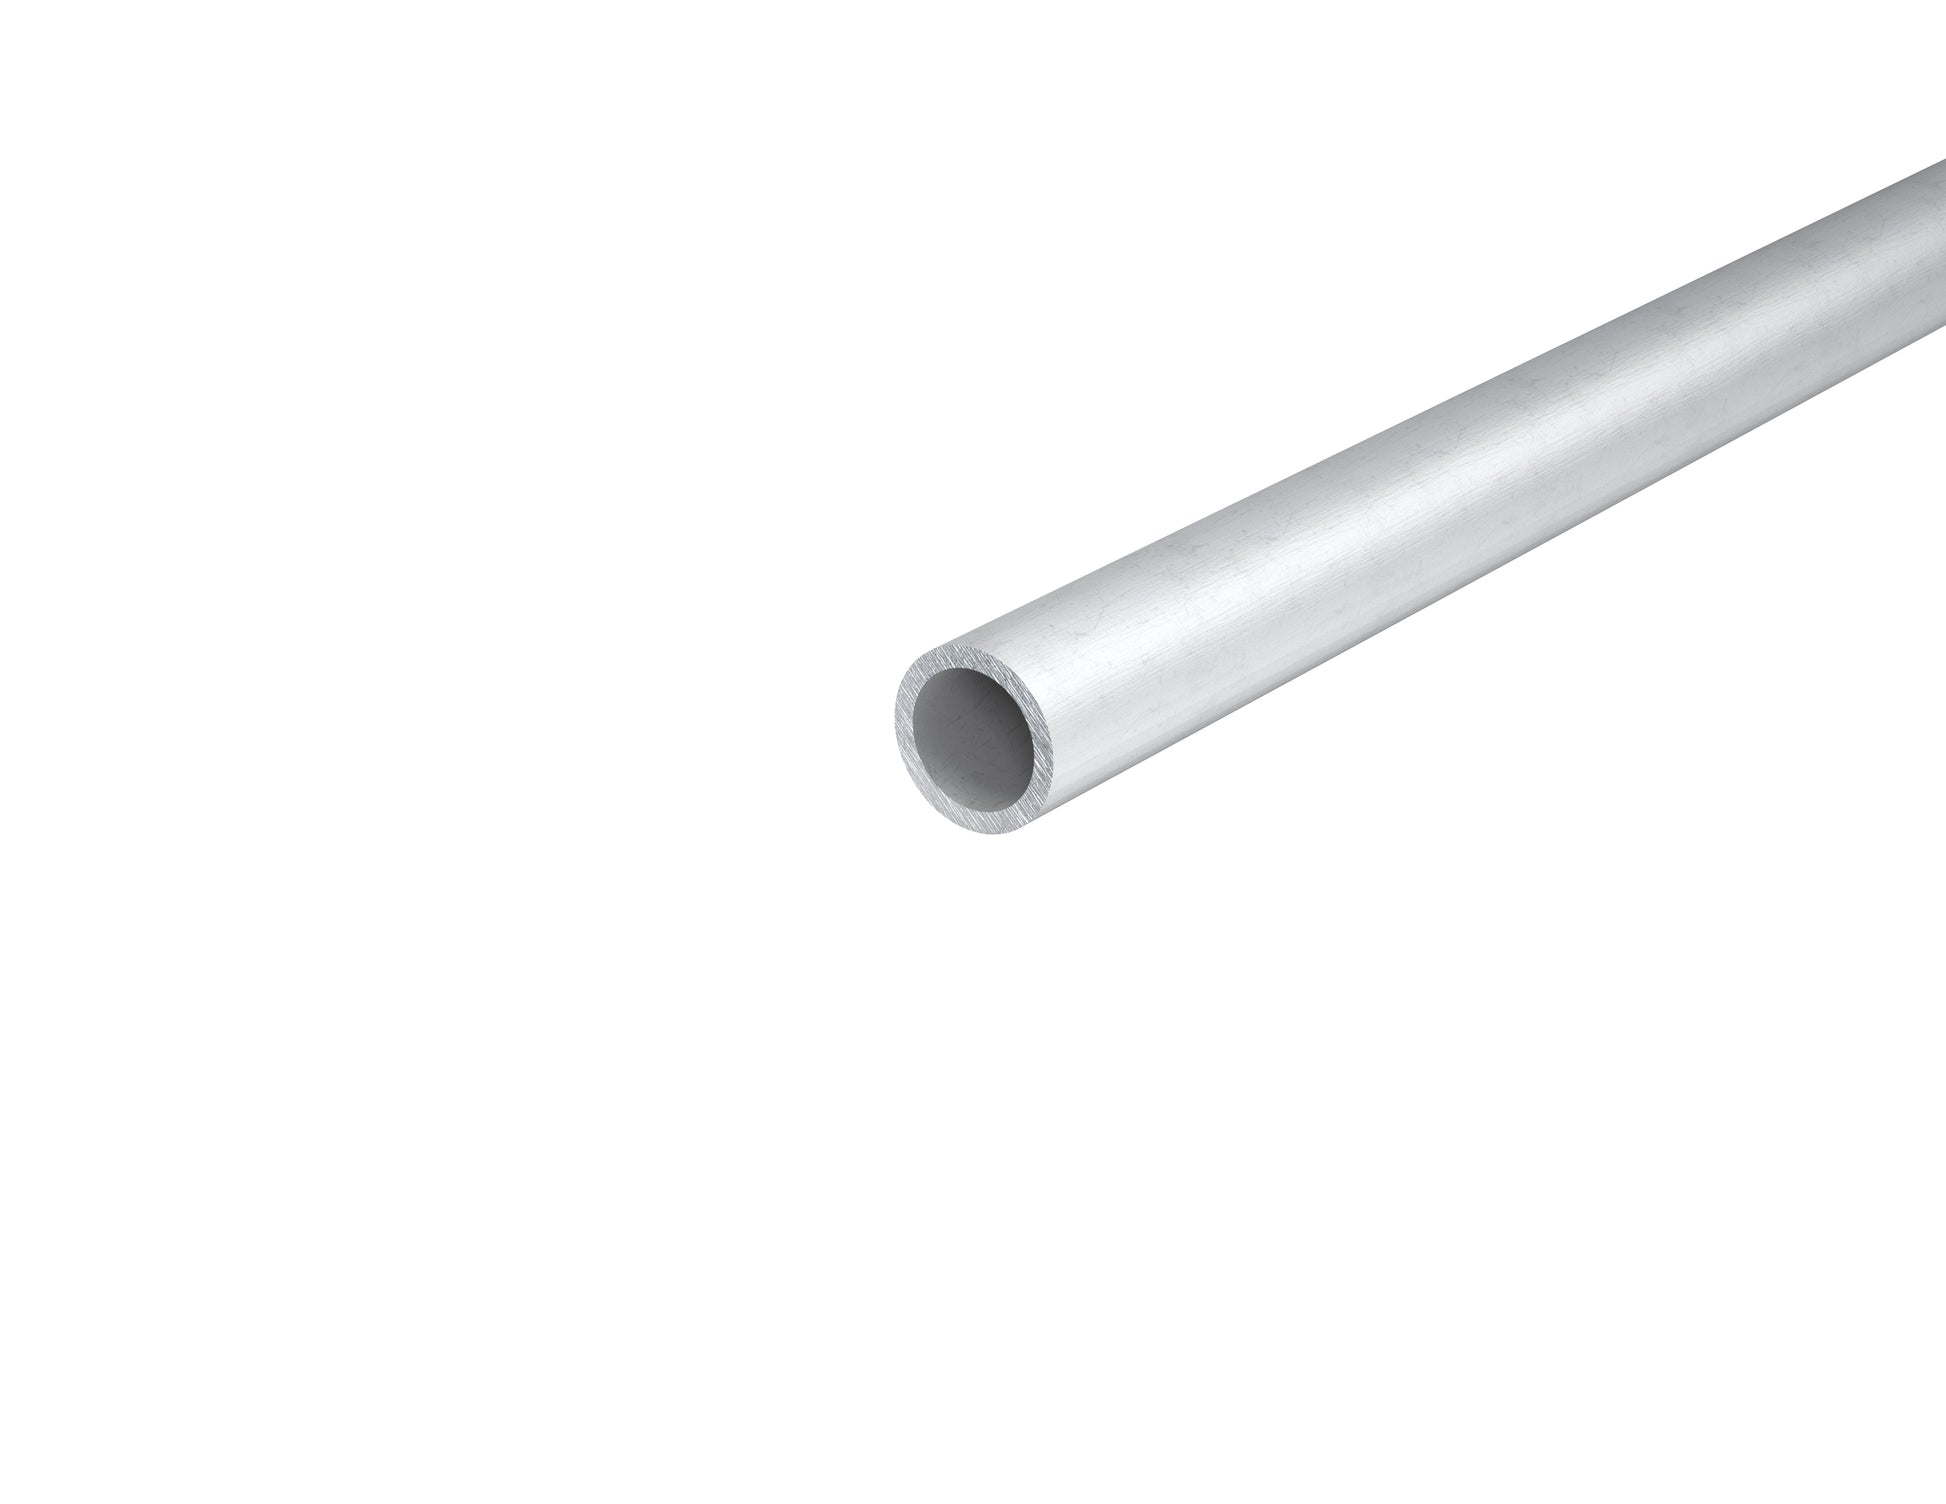 1.147" OD x 0.136" Wall Extruded Round Aluminum Tube 6063-T6 Approximately 1-1/8" OD x 1/8" wall